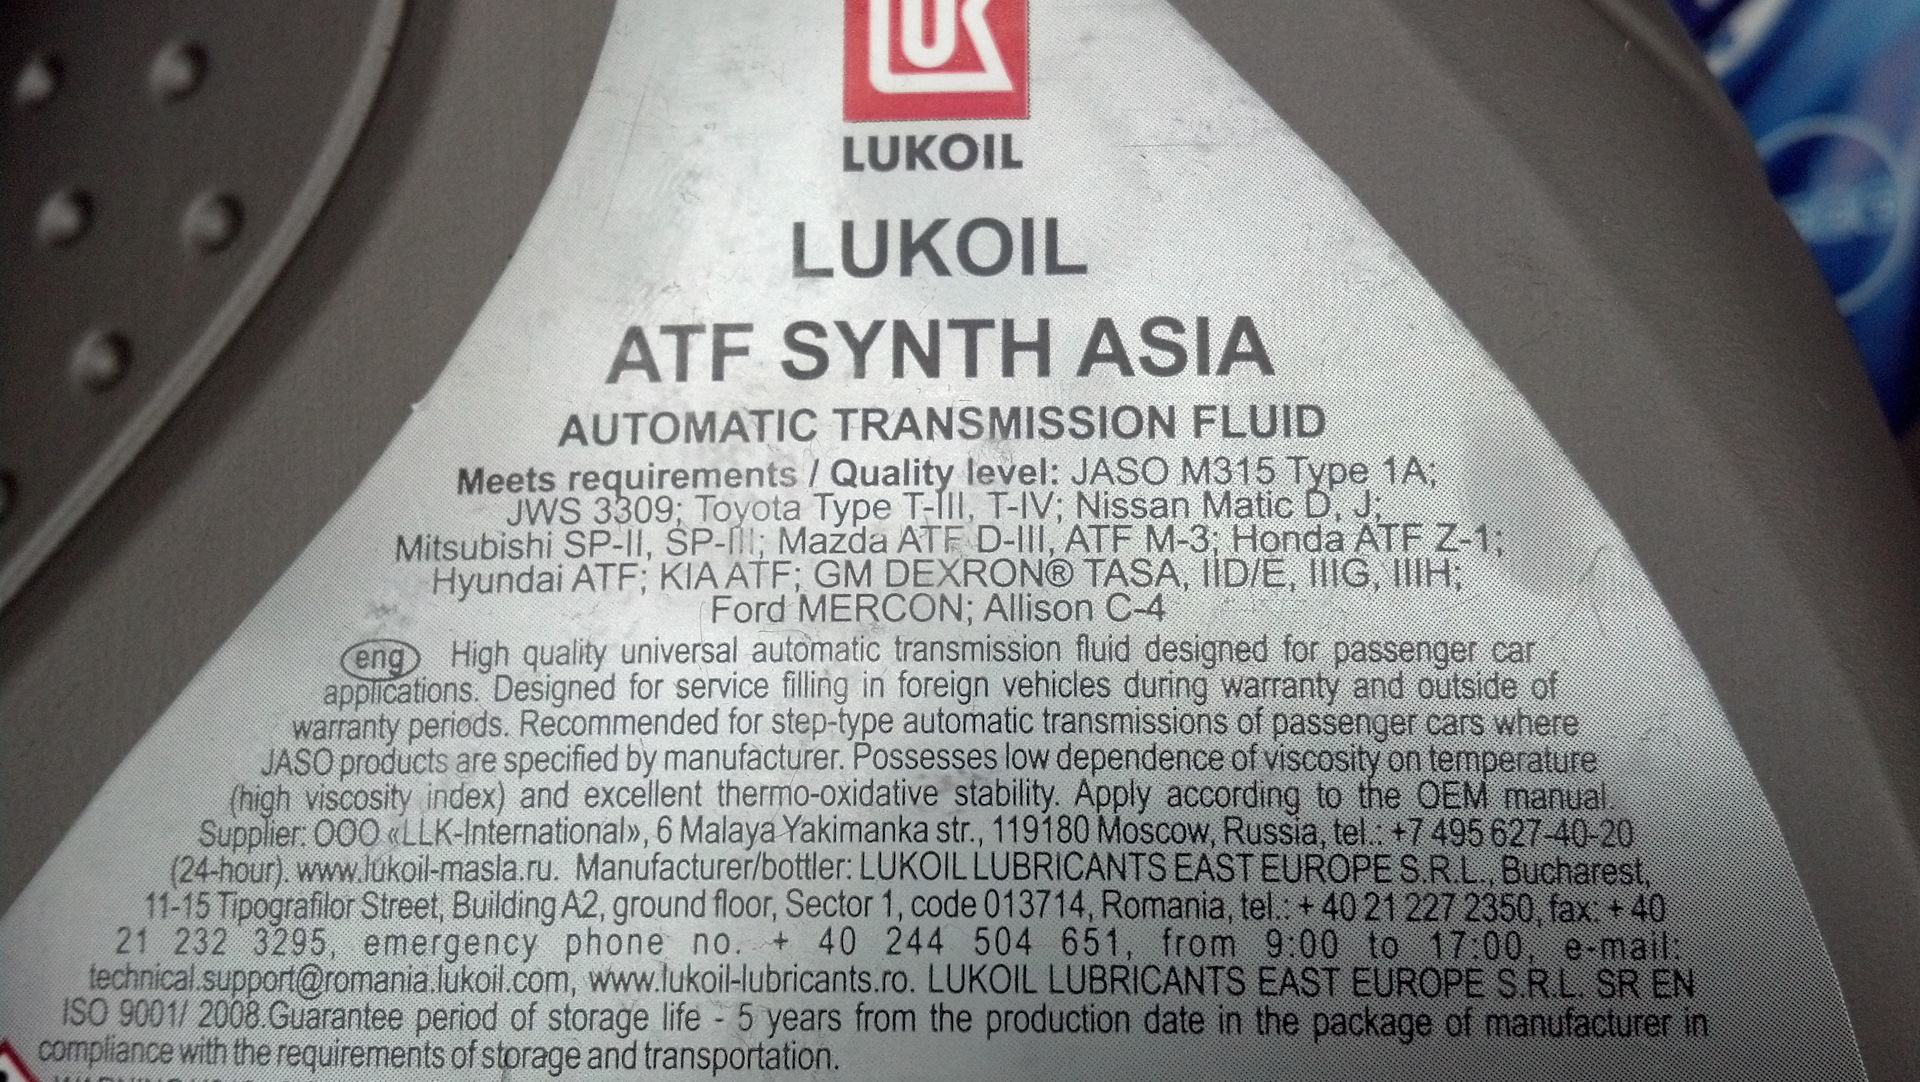 Atf synth multi